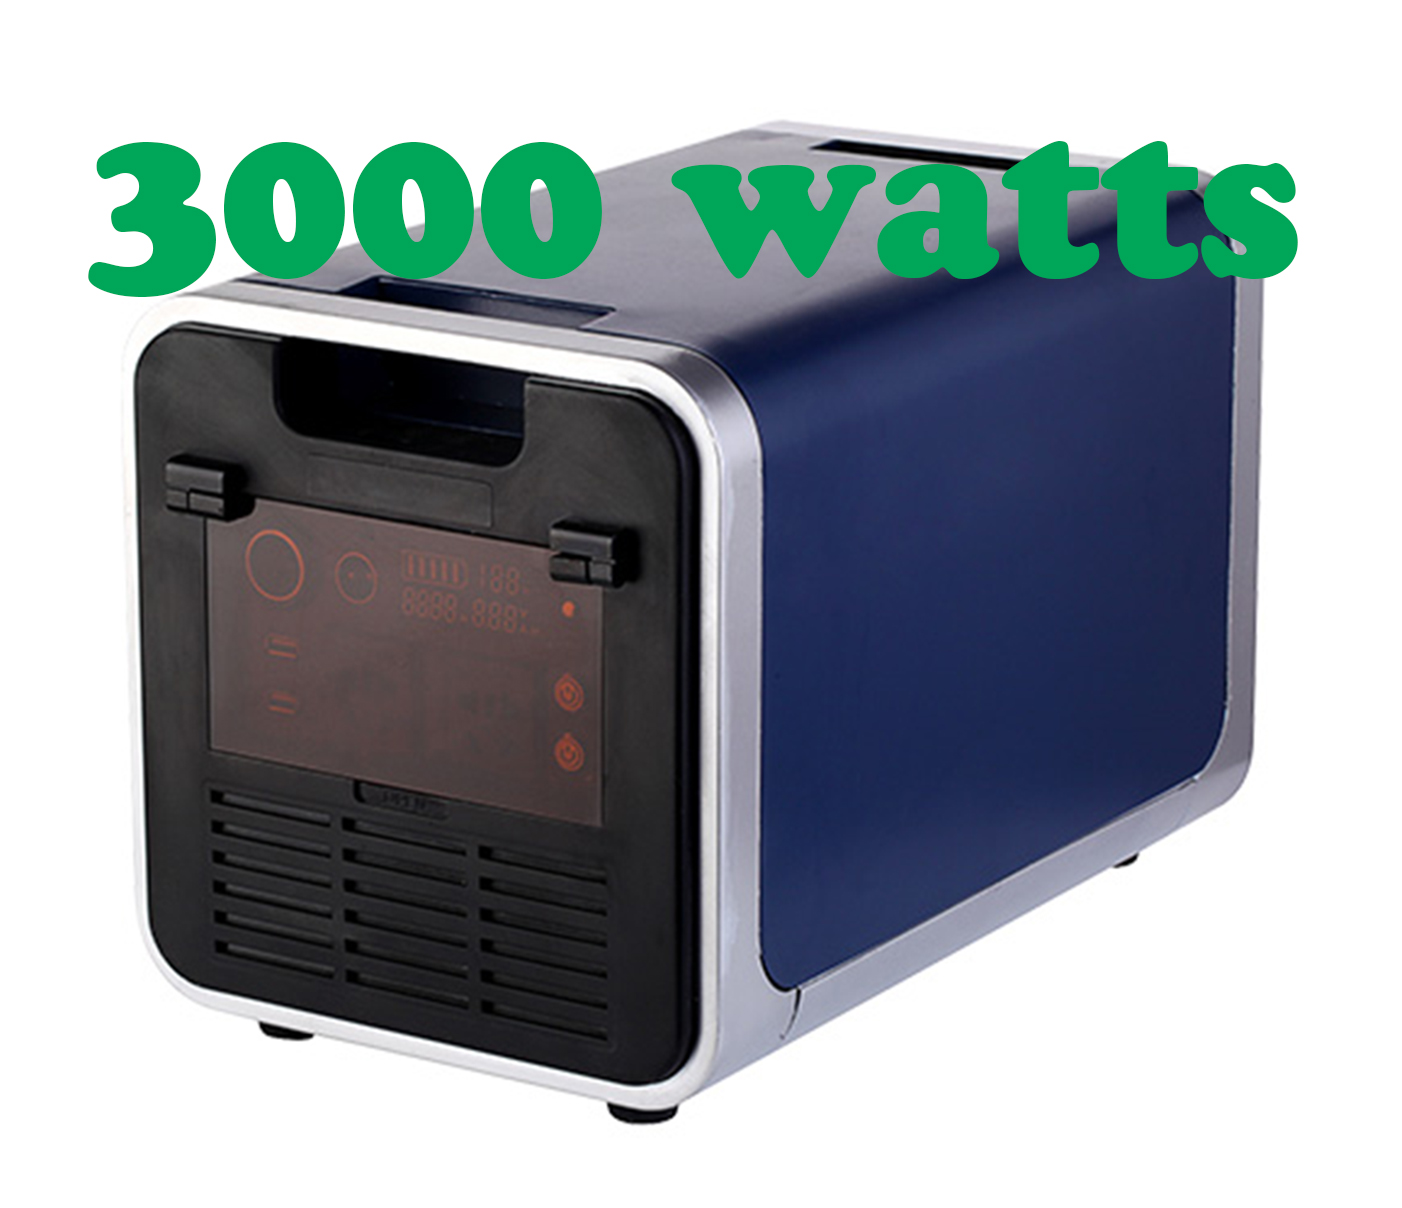 3000-Watt Portable Generator Power Station Home Camping Emergency Power Supply Charged by Solar Panel/AC Wall Outlet Backup/Emergency Power Supply 600000mAh 3000Wh Lithium Battery Pack 